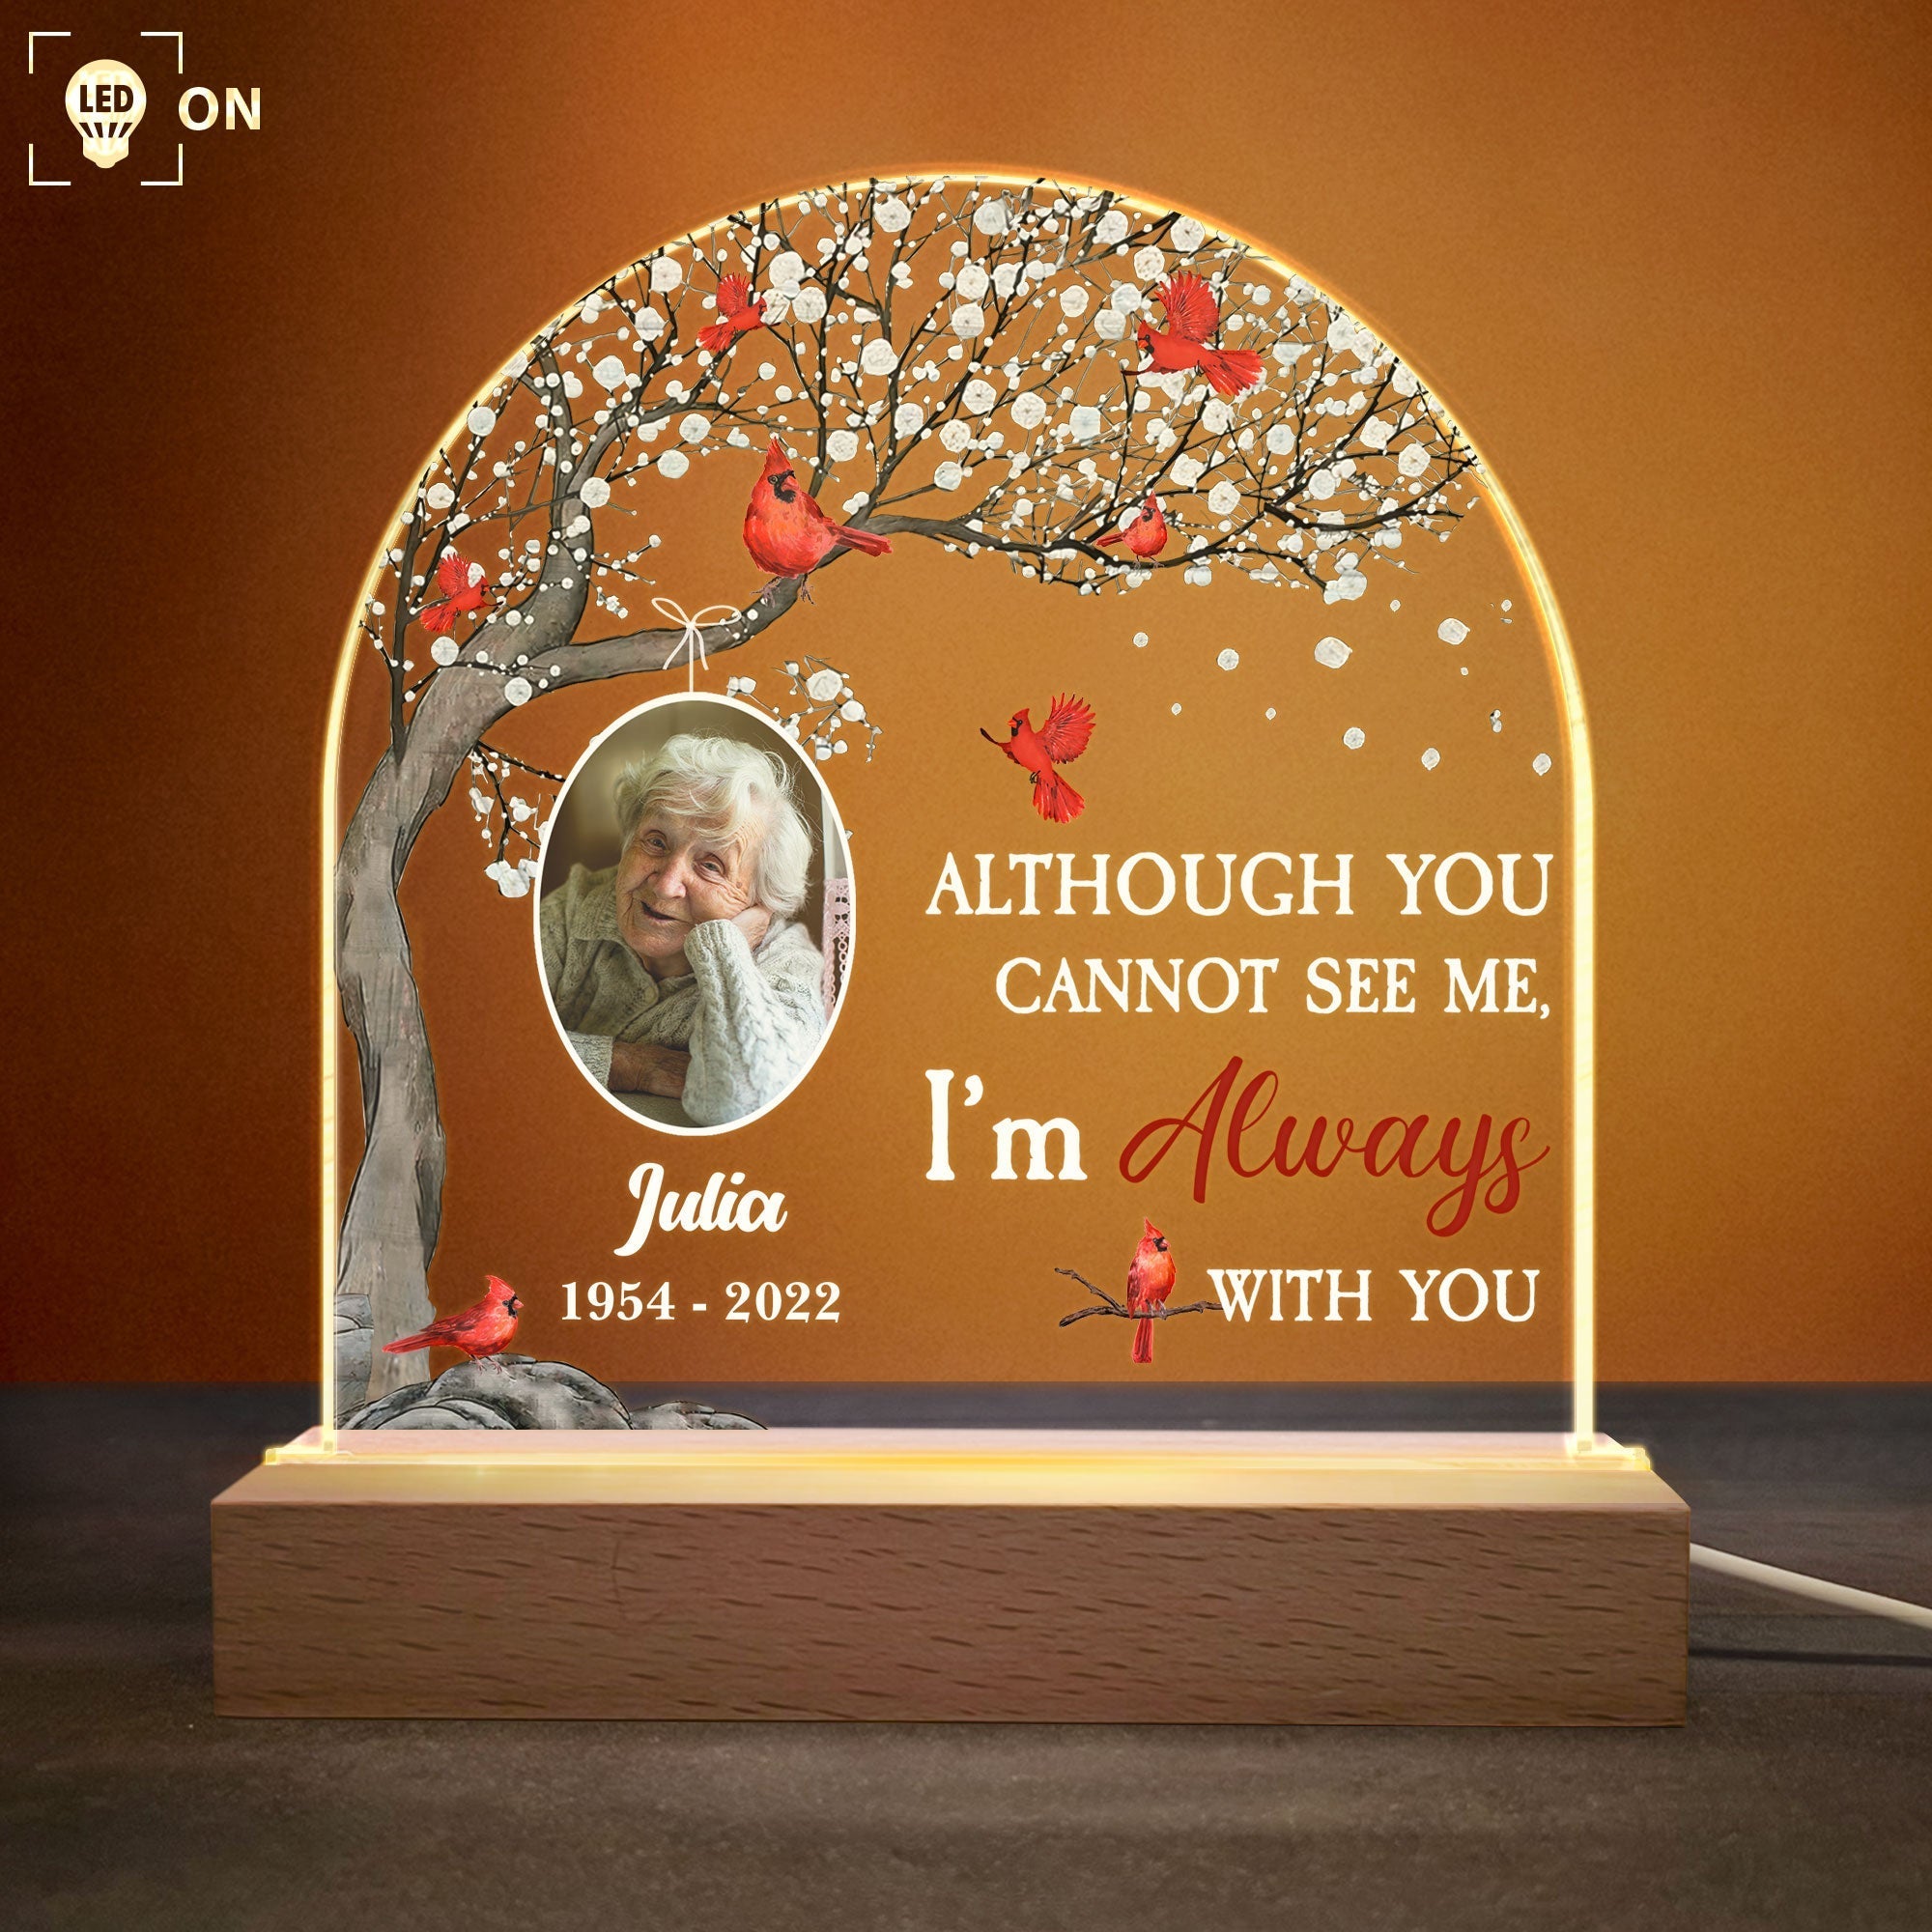 I Am Always With You - Personalized 3D LED Light Wooden Base - Memorial, Loving Gift For Family With Loss Ones, Husband & Wife, Grandparents, Siblings